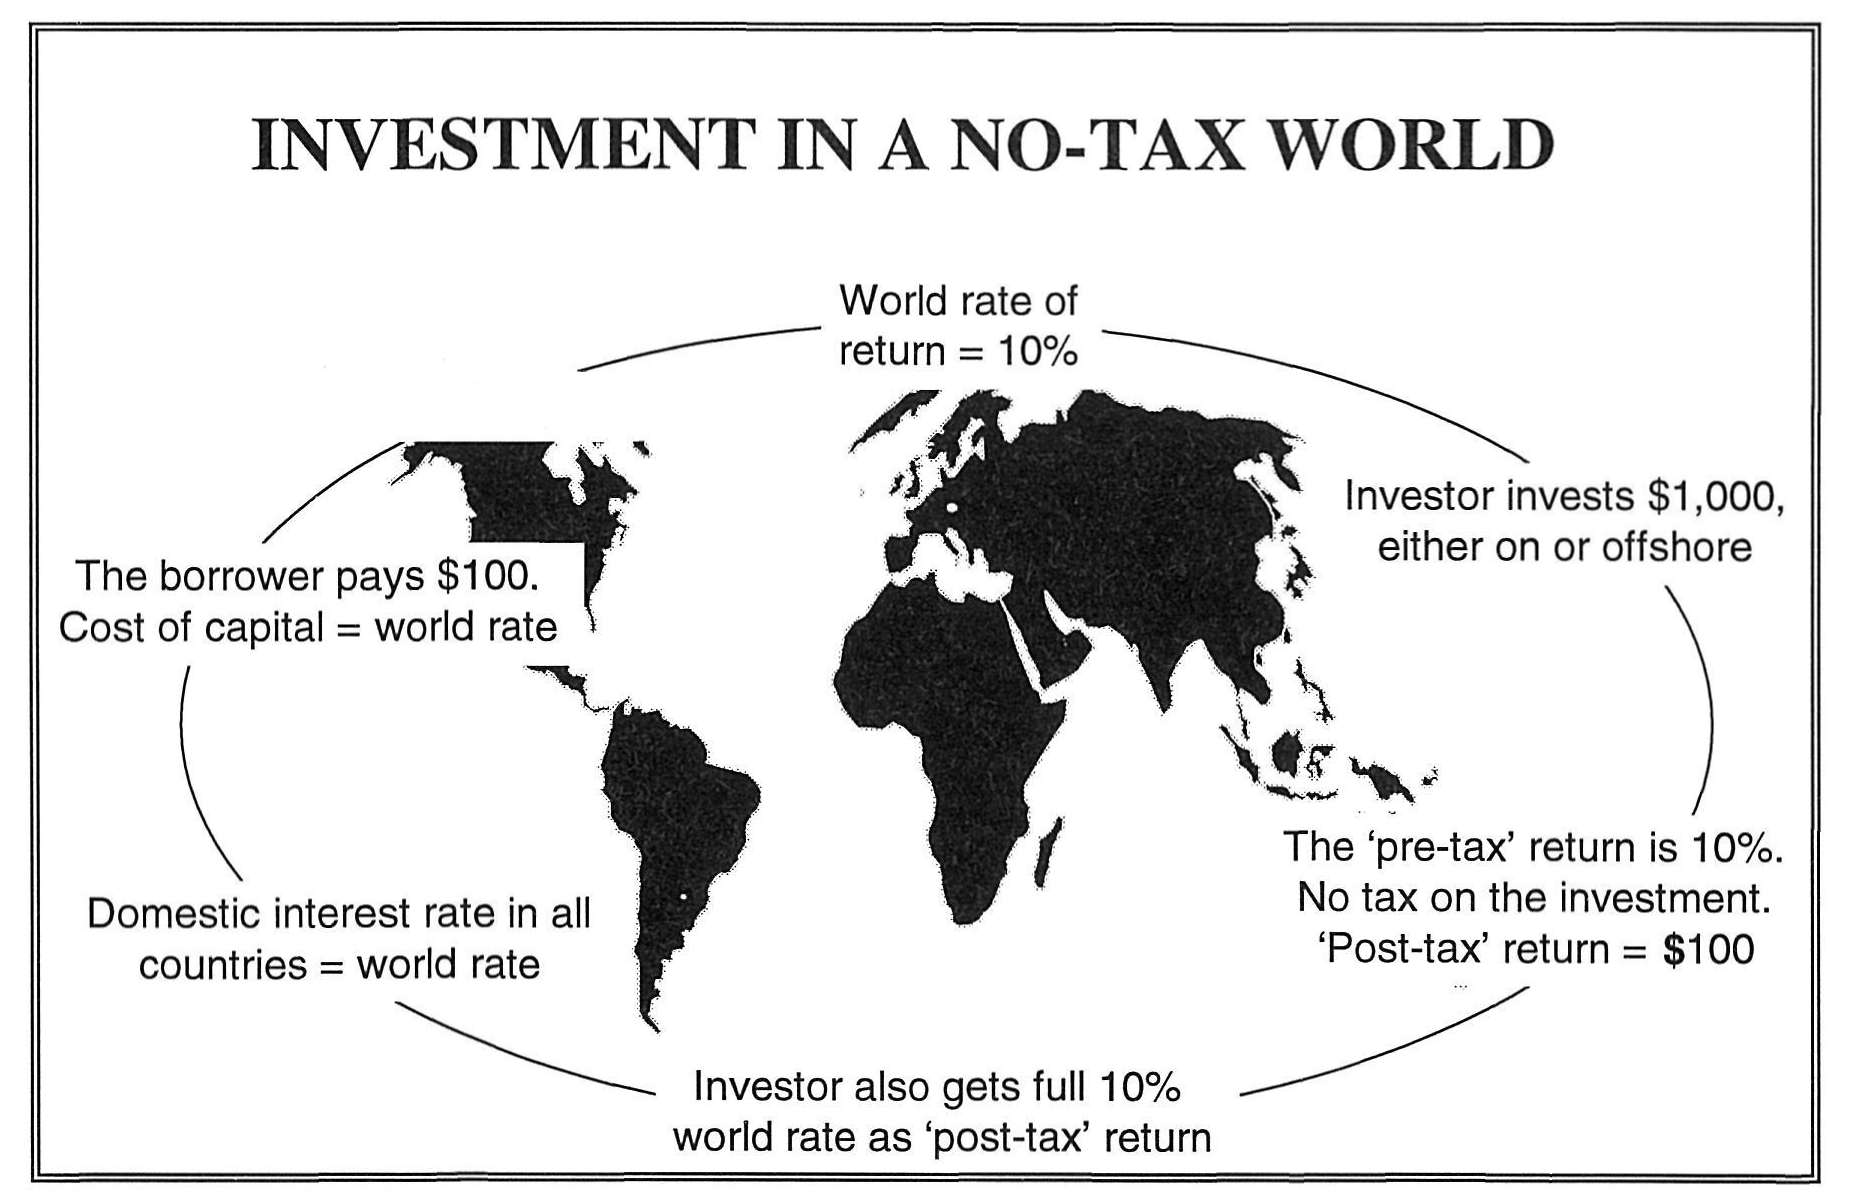 Figure 1: Investment in a no-tax world